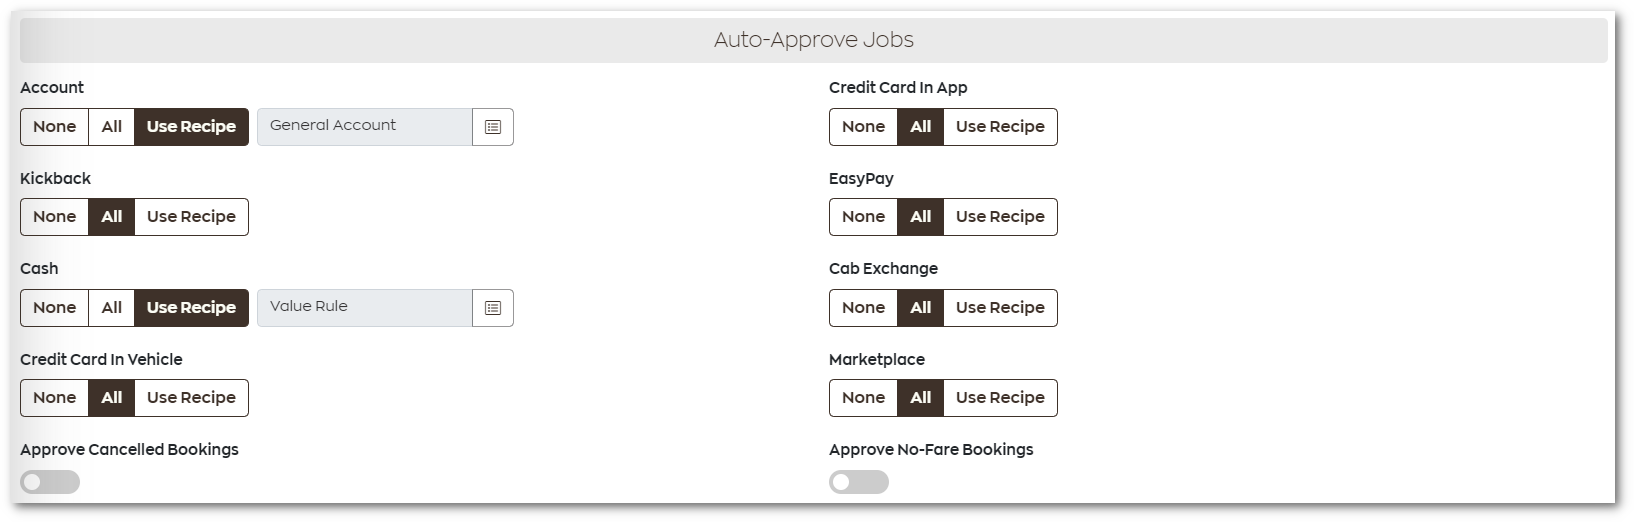 accounts_automator_auto_approve_jobs.png